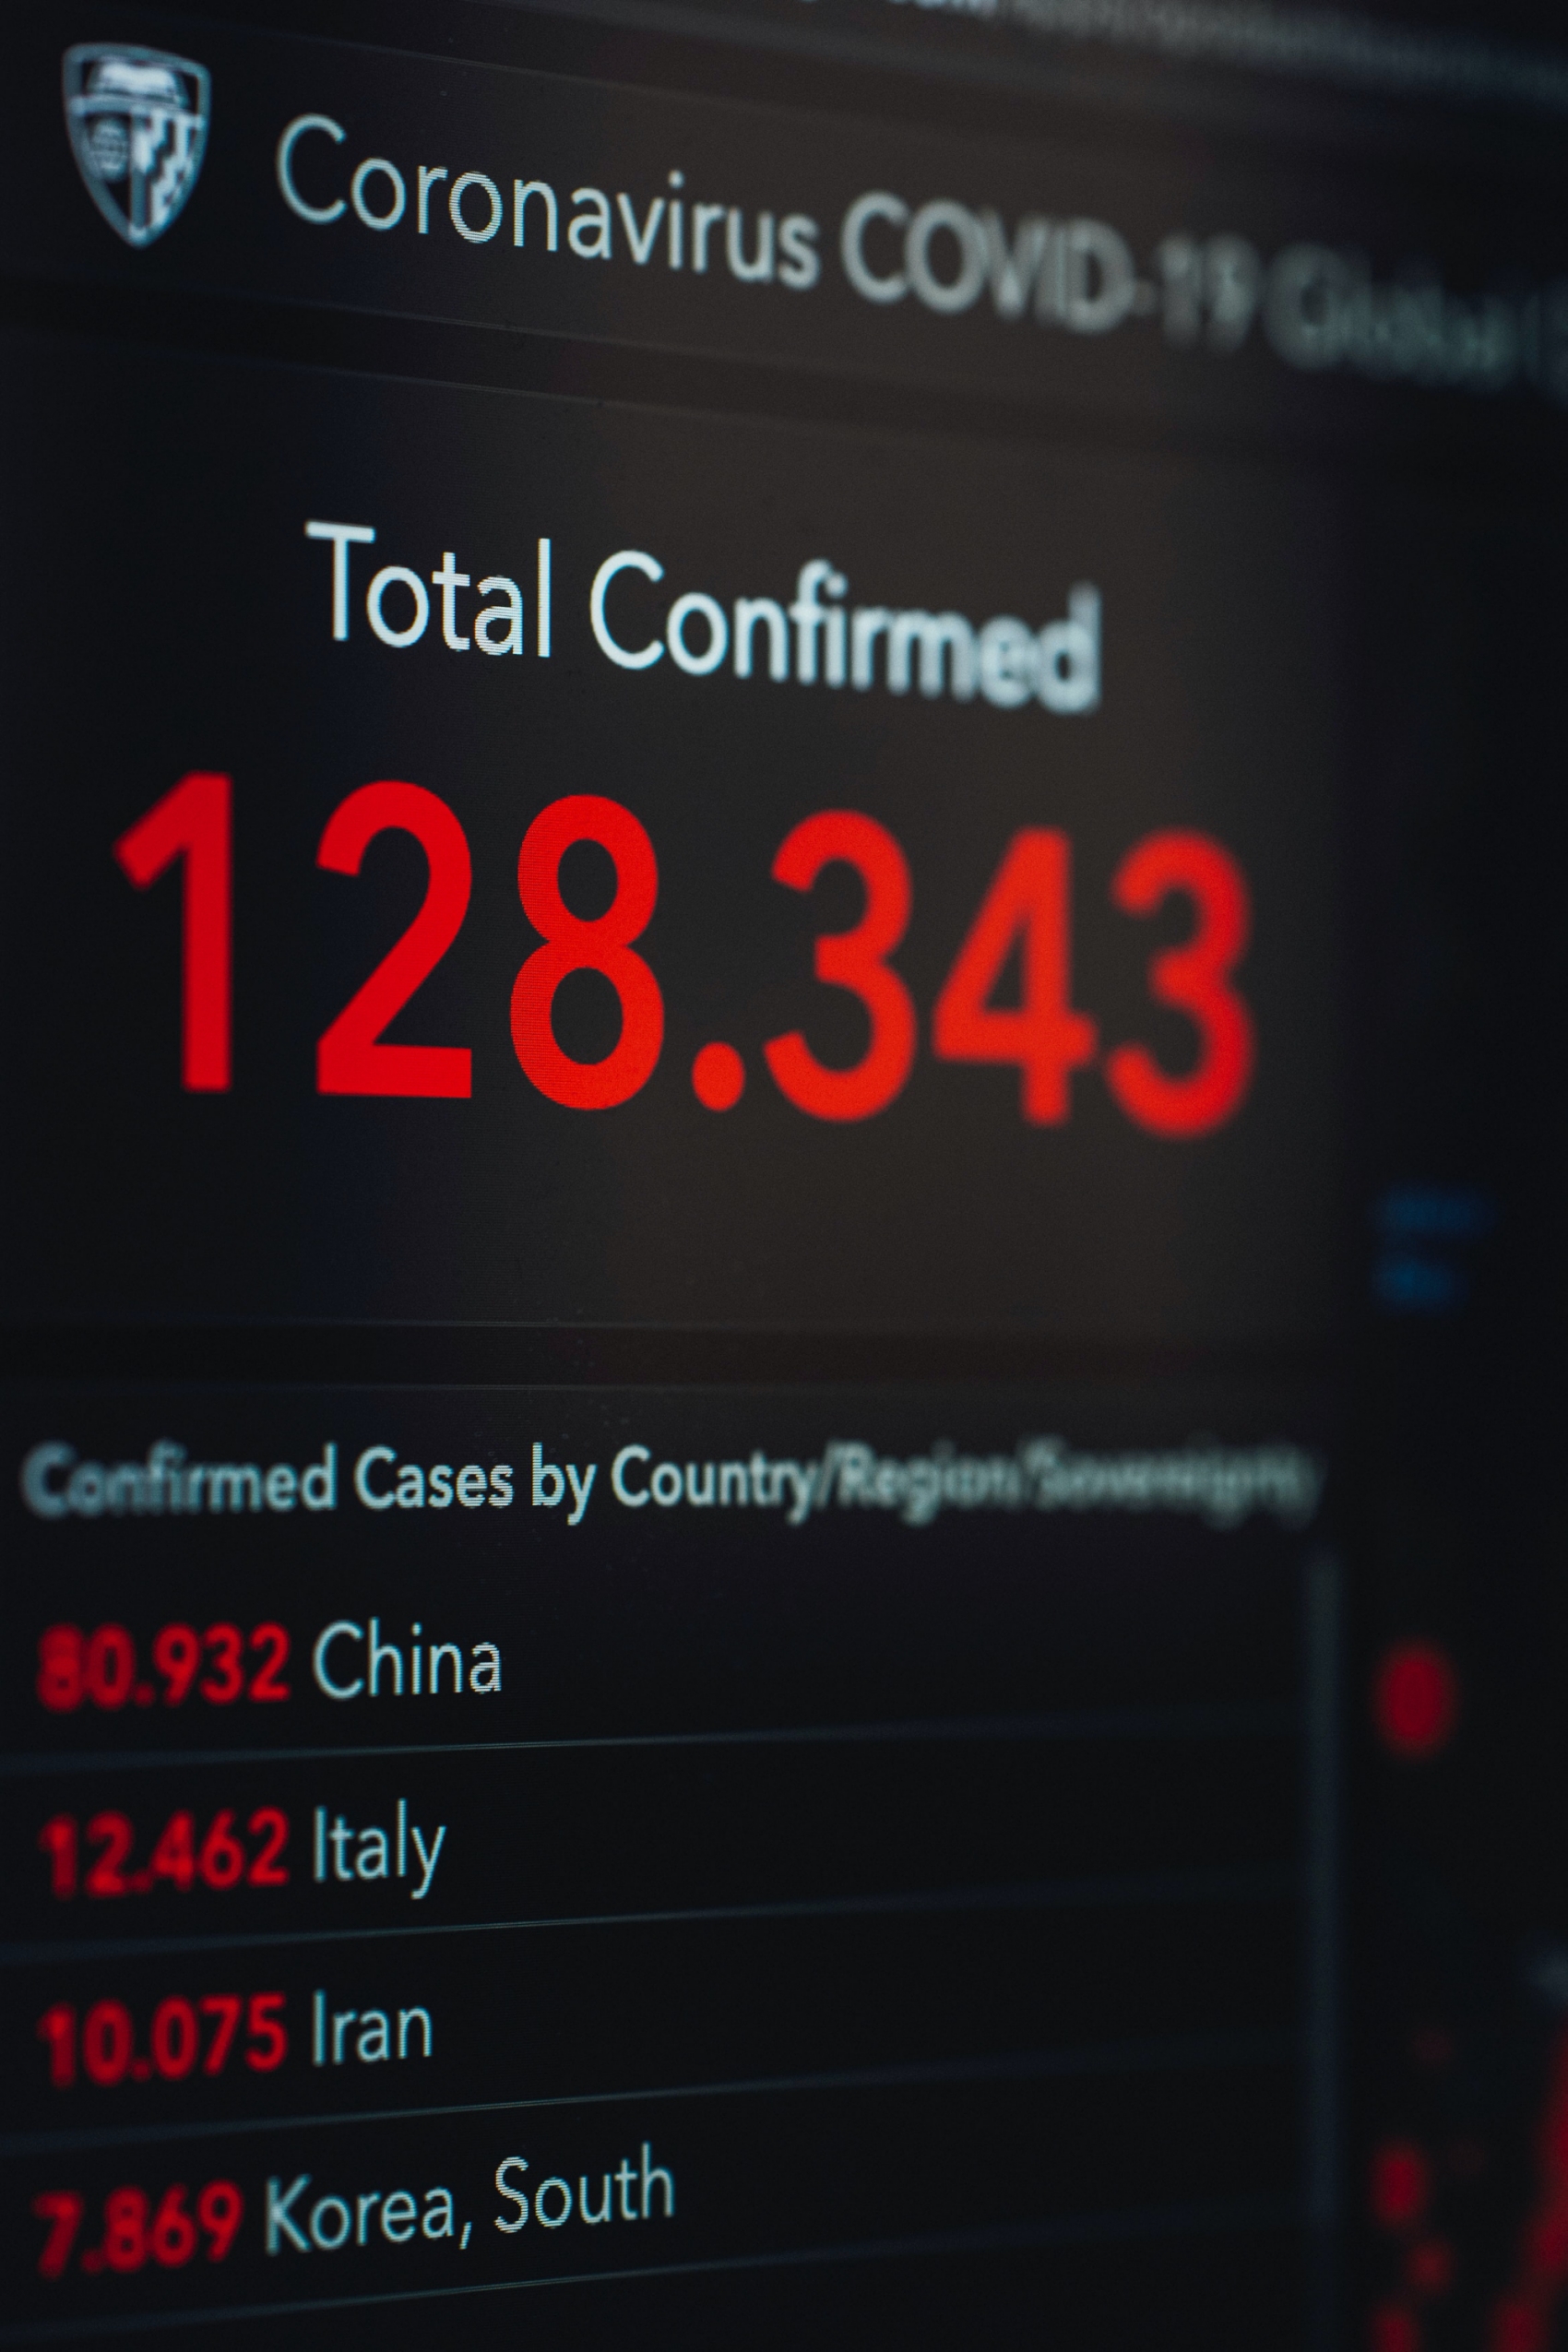 As at 27 April 2020, there are 3,0004,120 confirmed COVID-19 cases, with 207,119 deaths and 882,772 recovered (Source: Markus Spiske/Pexels)